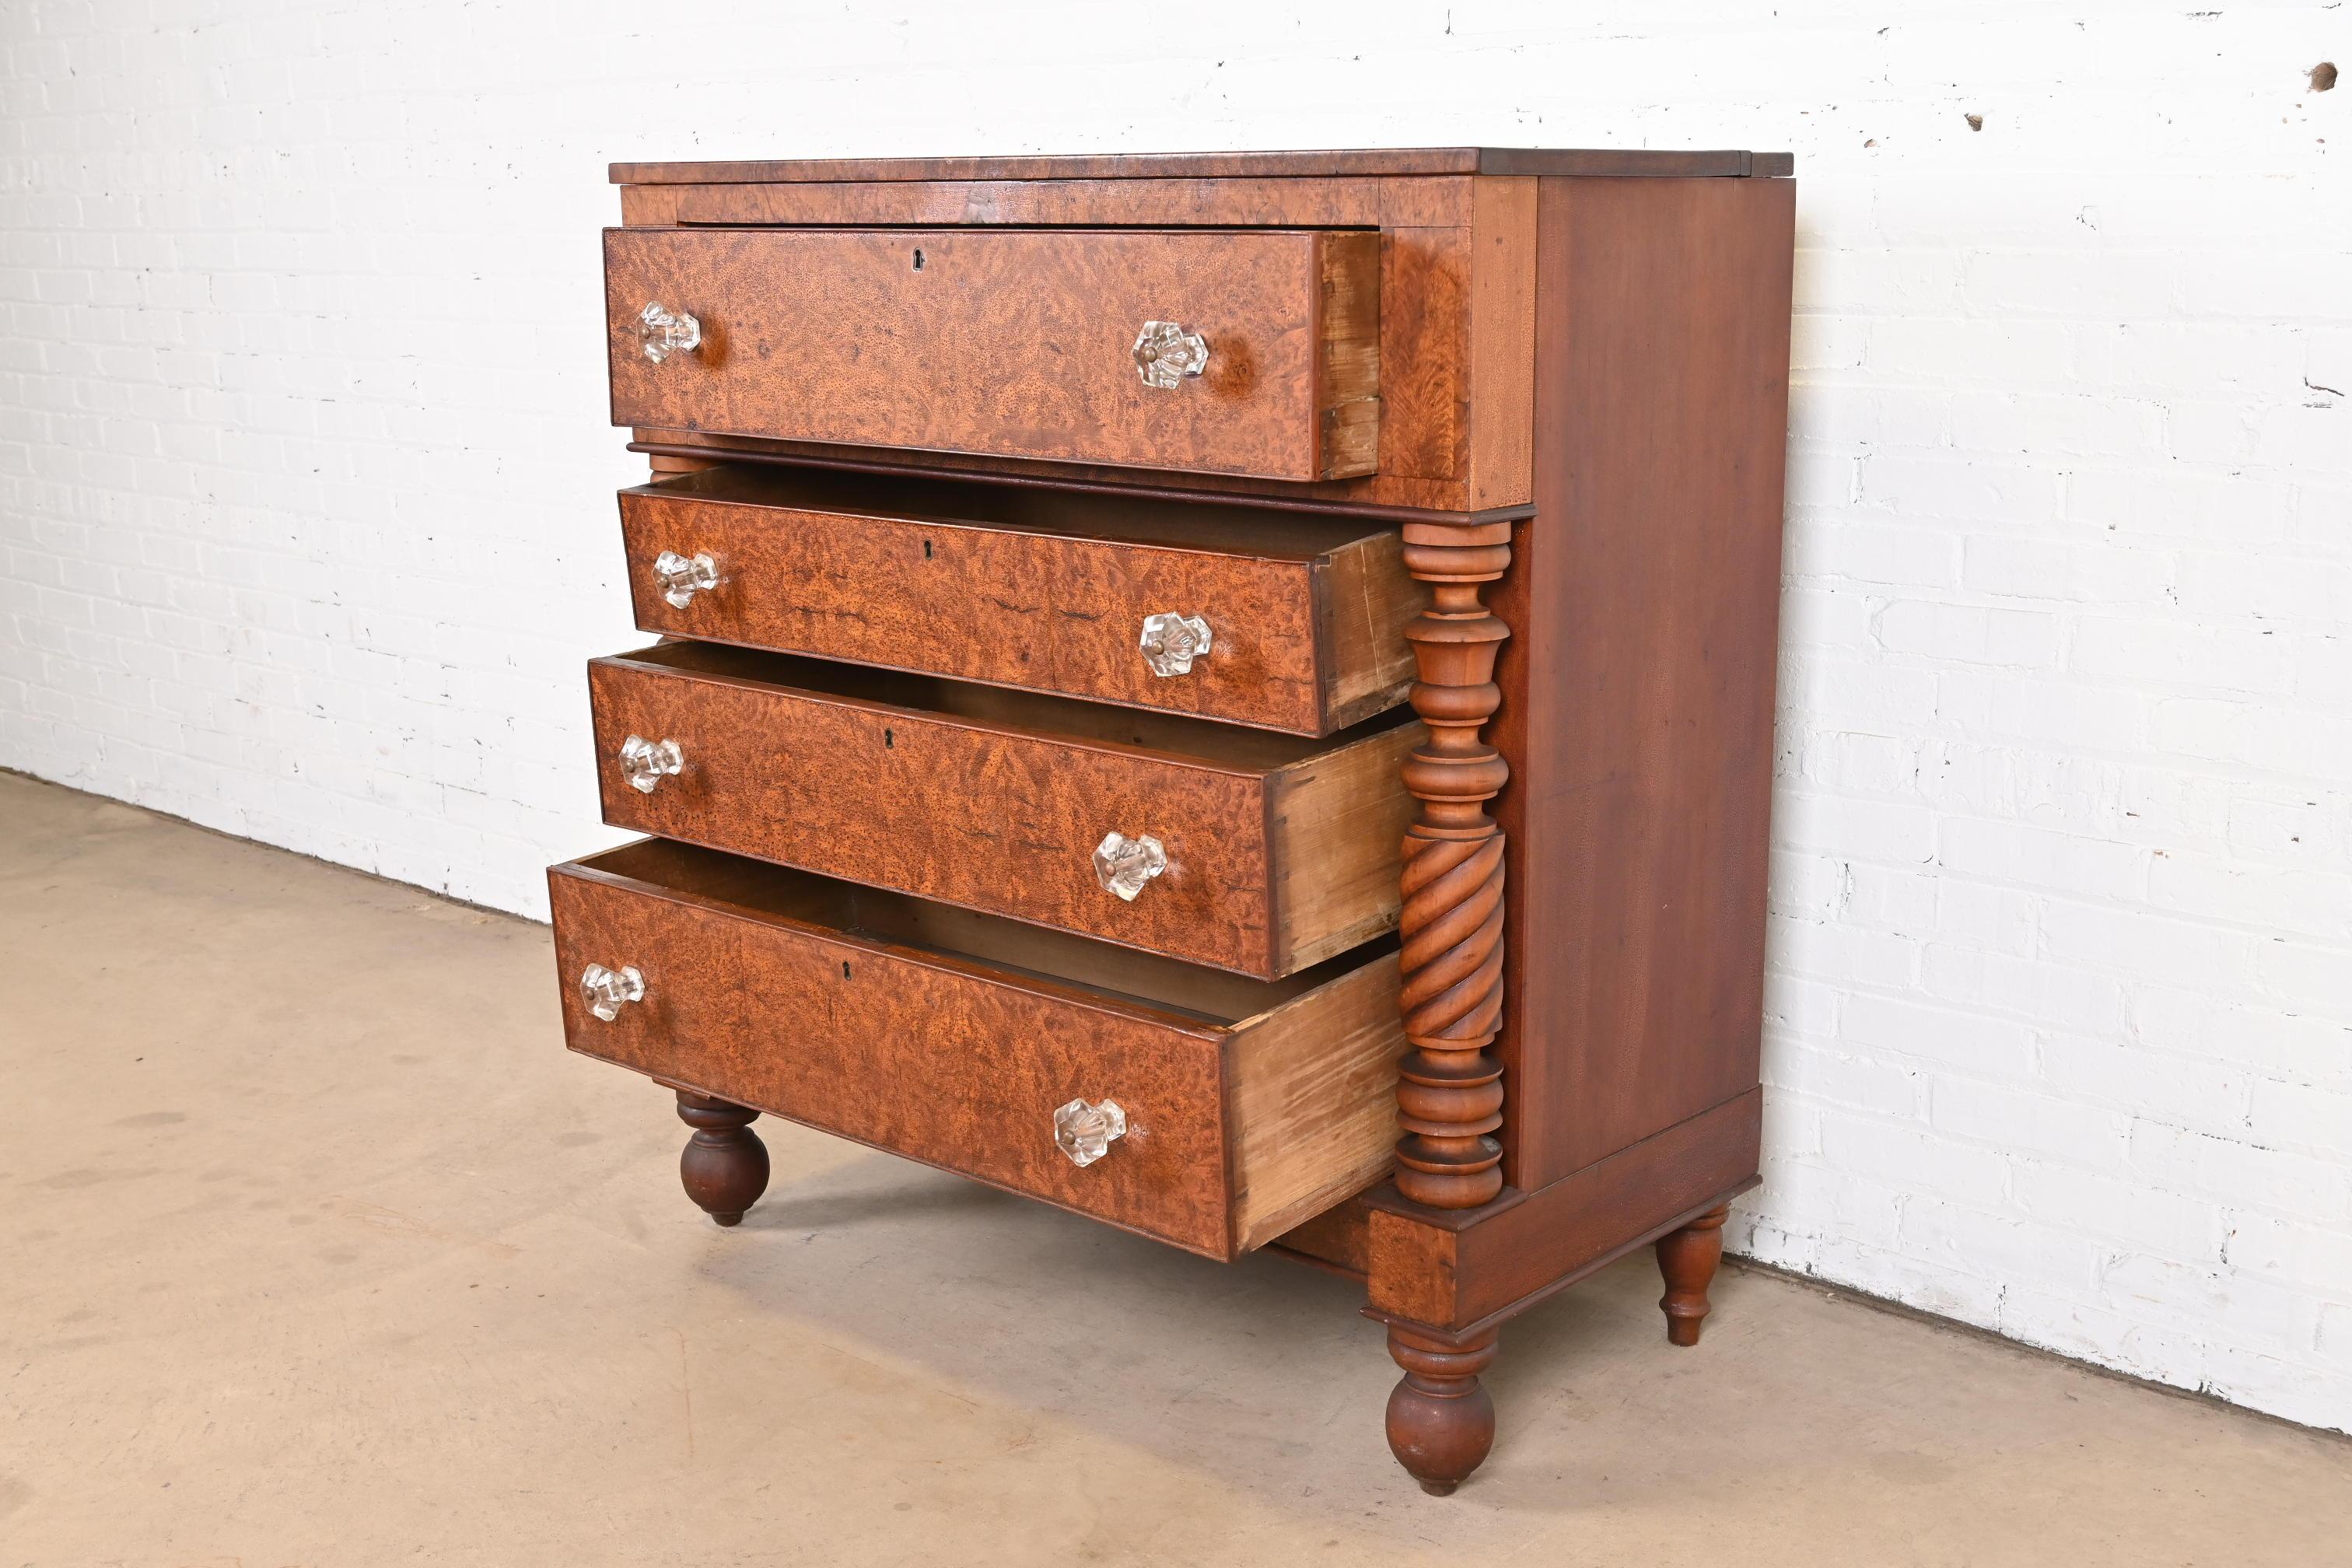 Antique American Empire Burled Mahogany Chest of Drawers, Circa 1820s For Sale 3